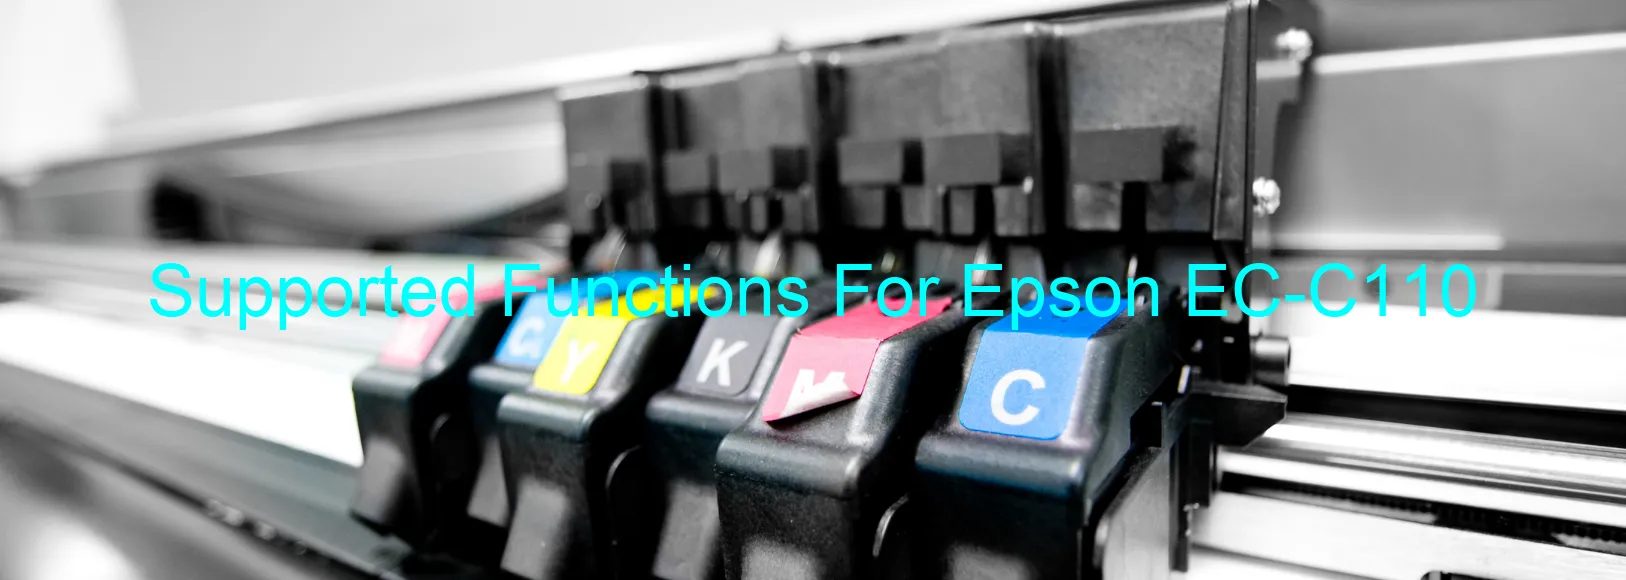 Epson EC-C110 supported Functions